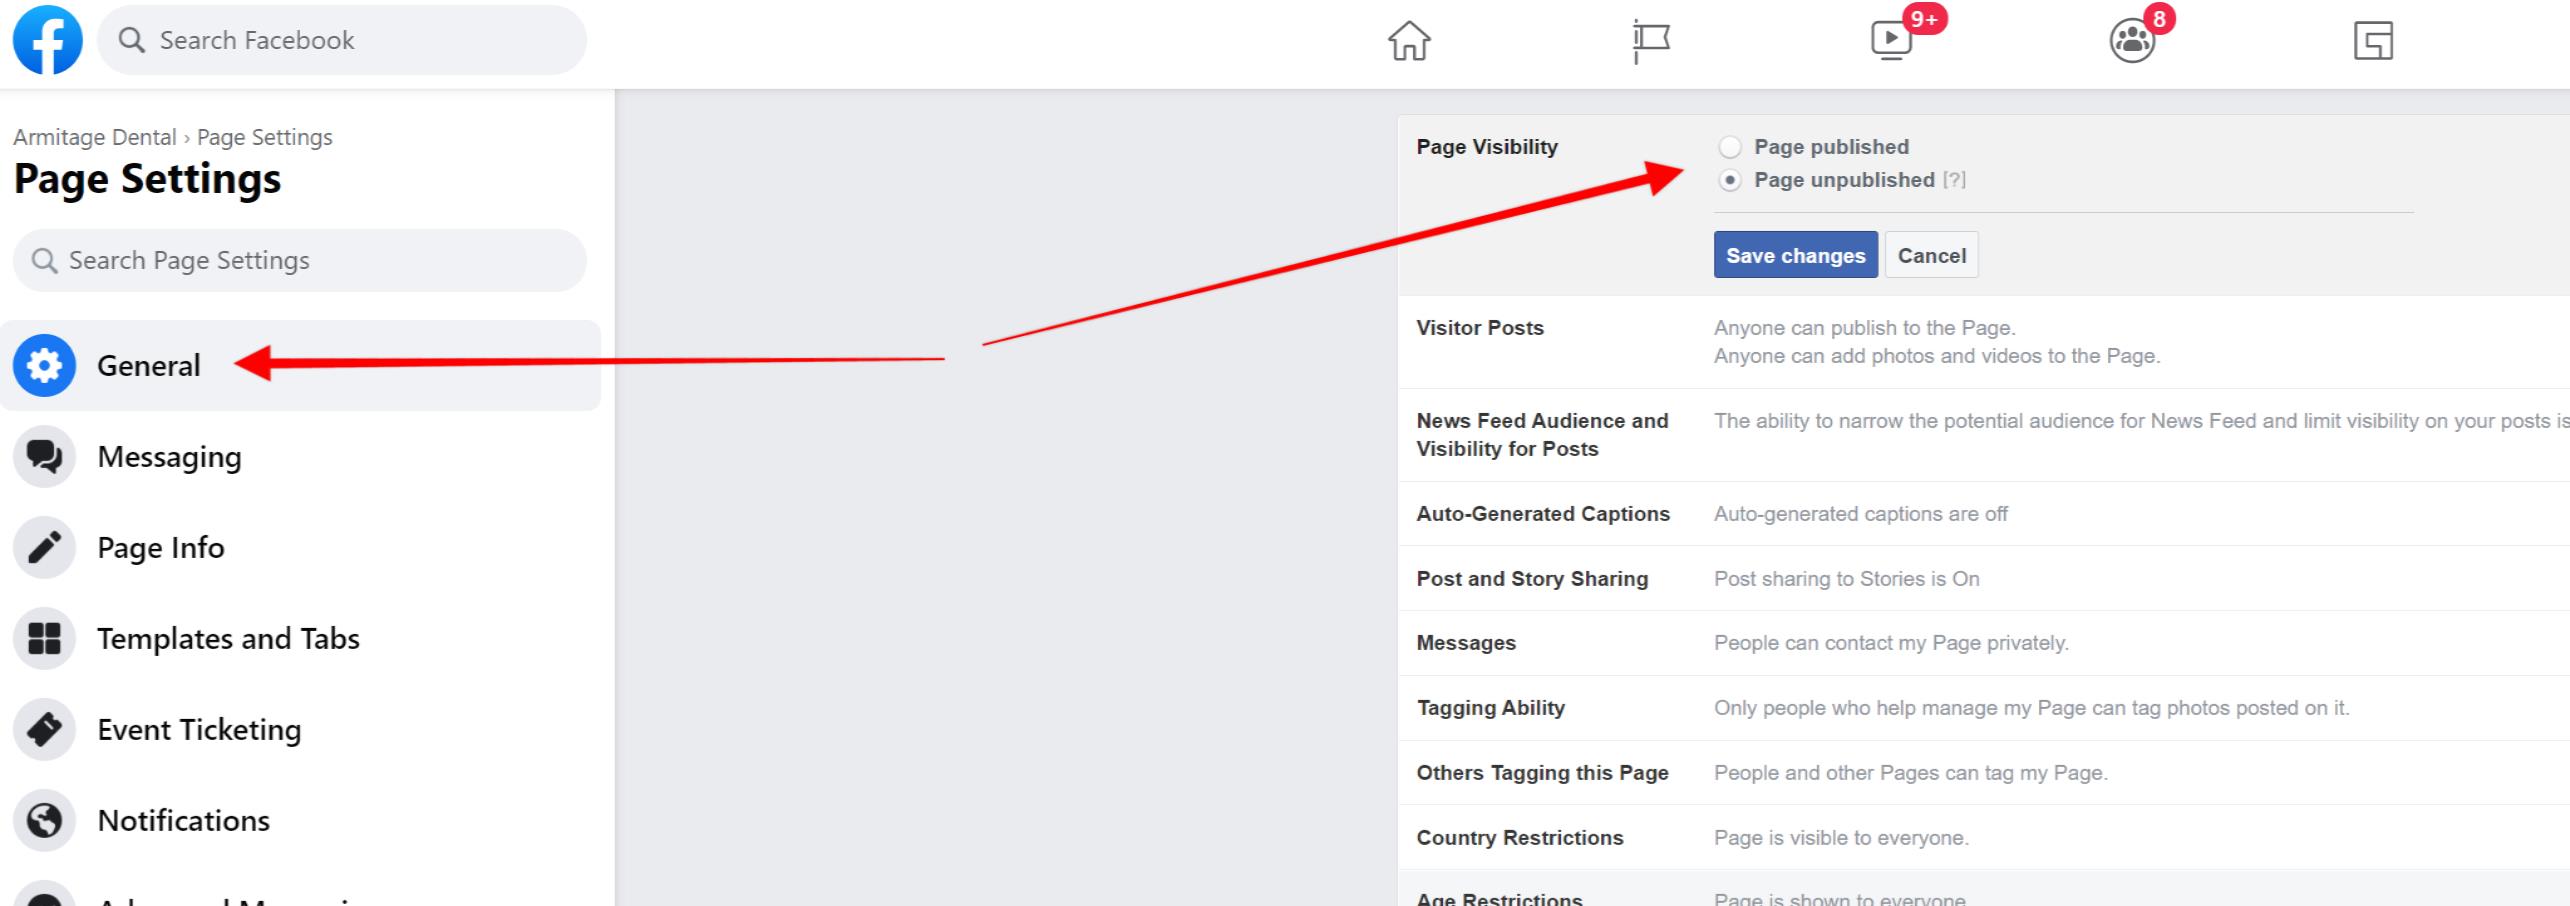 How to delete a Facebook business page (stepbystep)